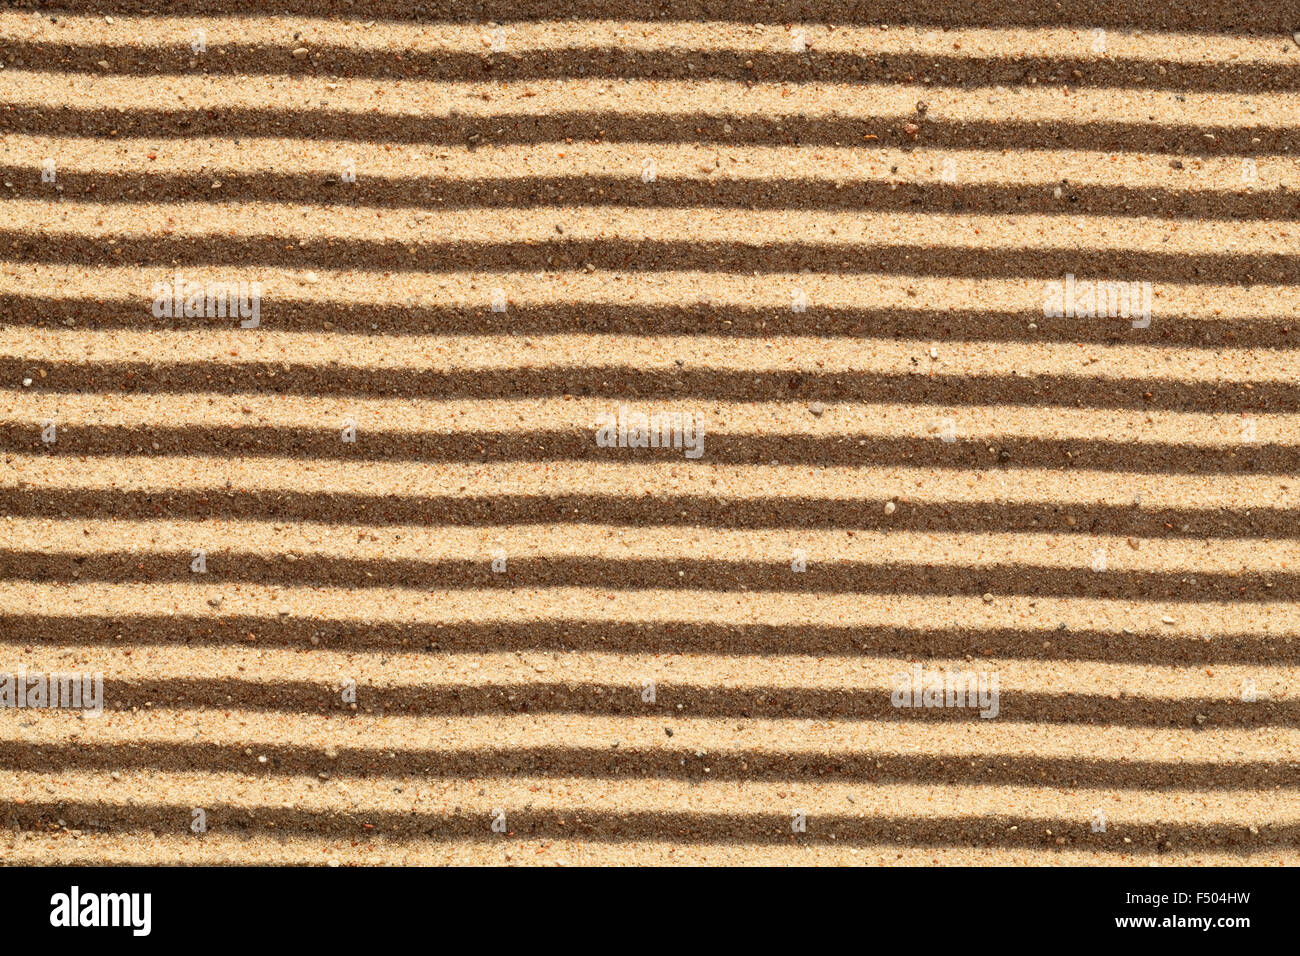 yellow dry sand in stripes as background Stock Photo